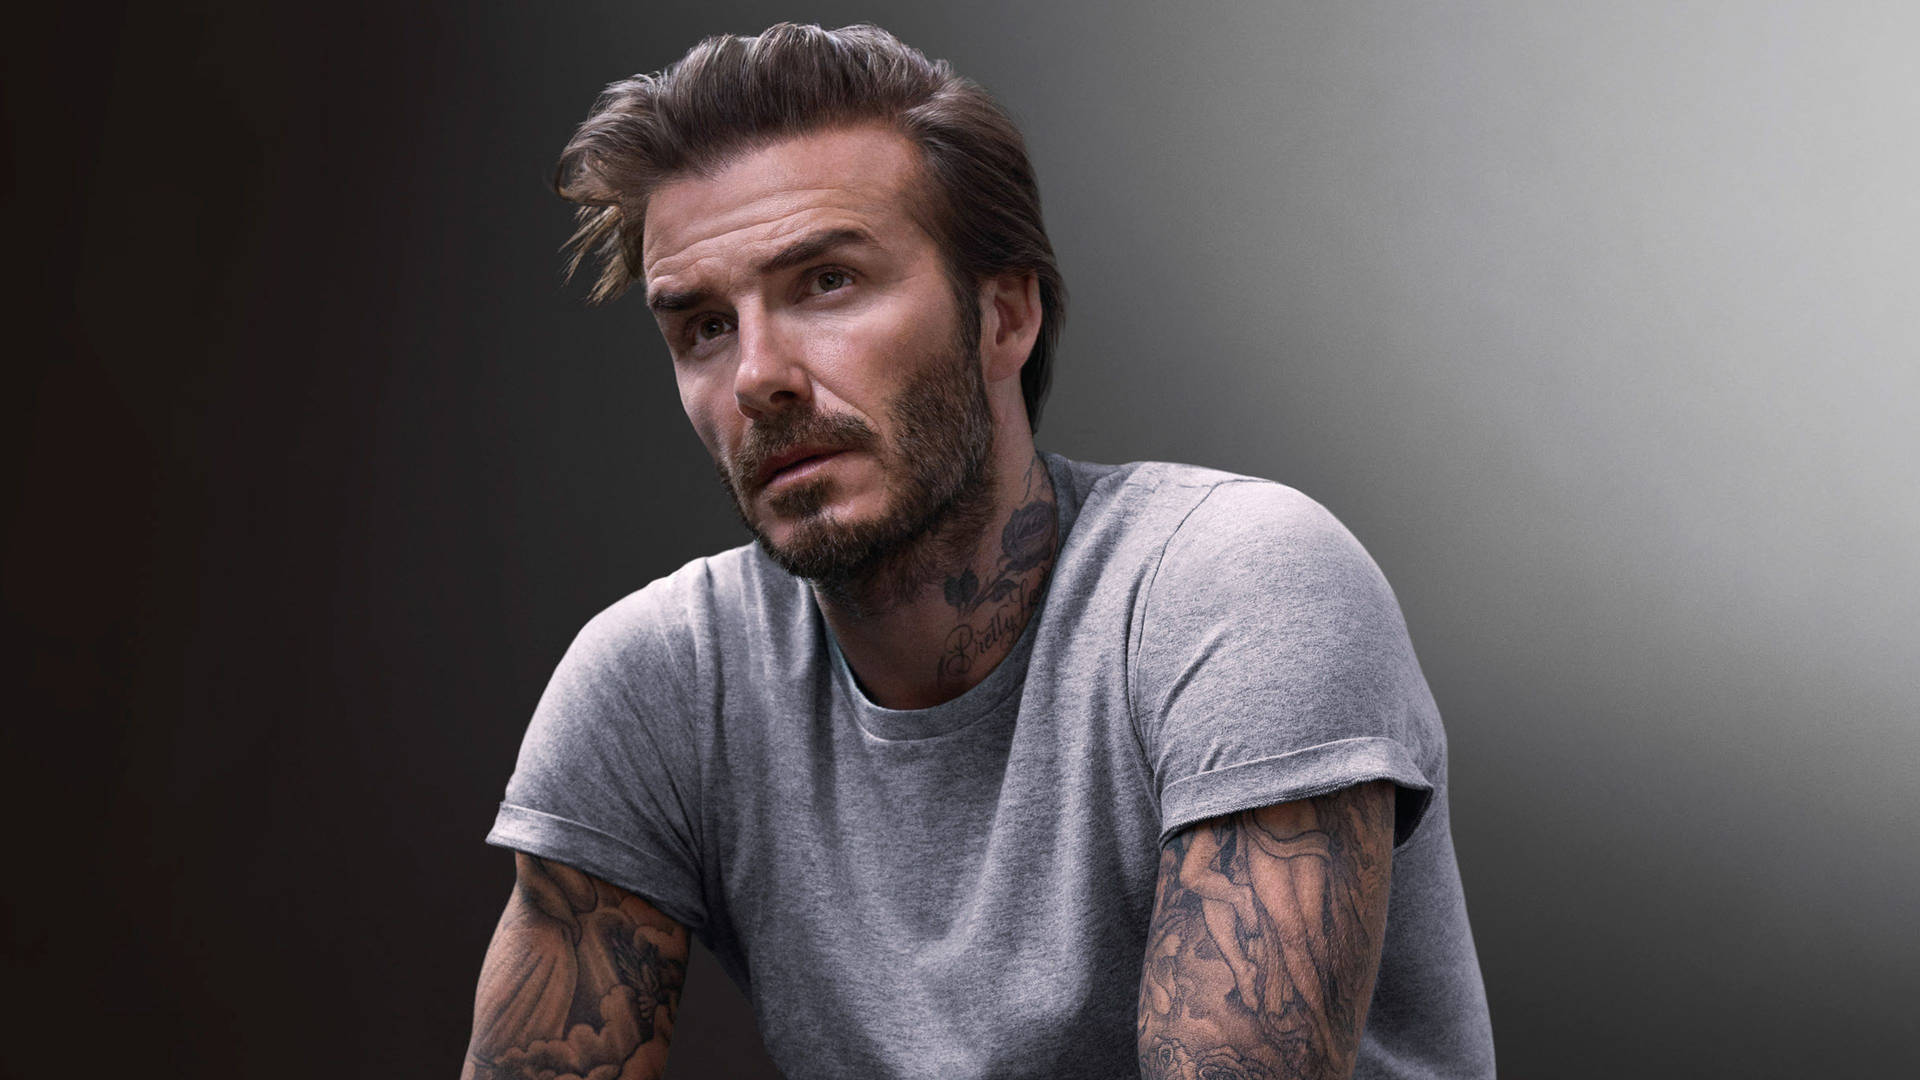 David Beckham wearing his iconic style for H&M's Bodywear Collection. Wallpaper